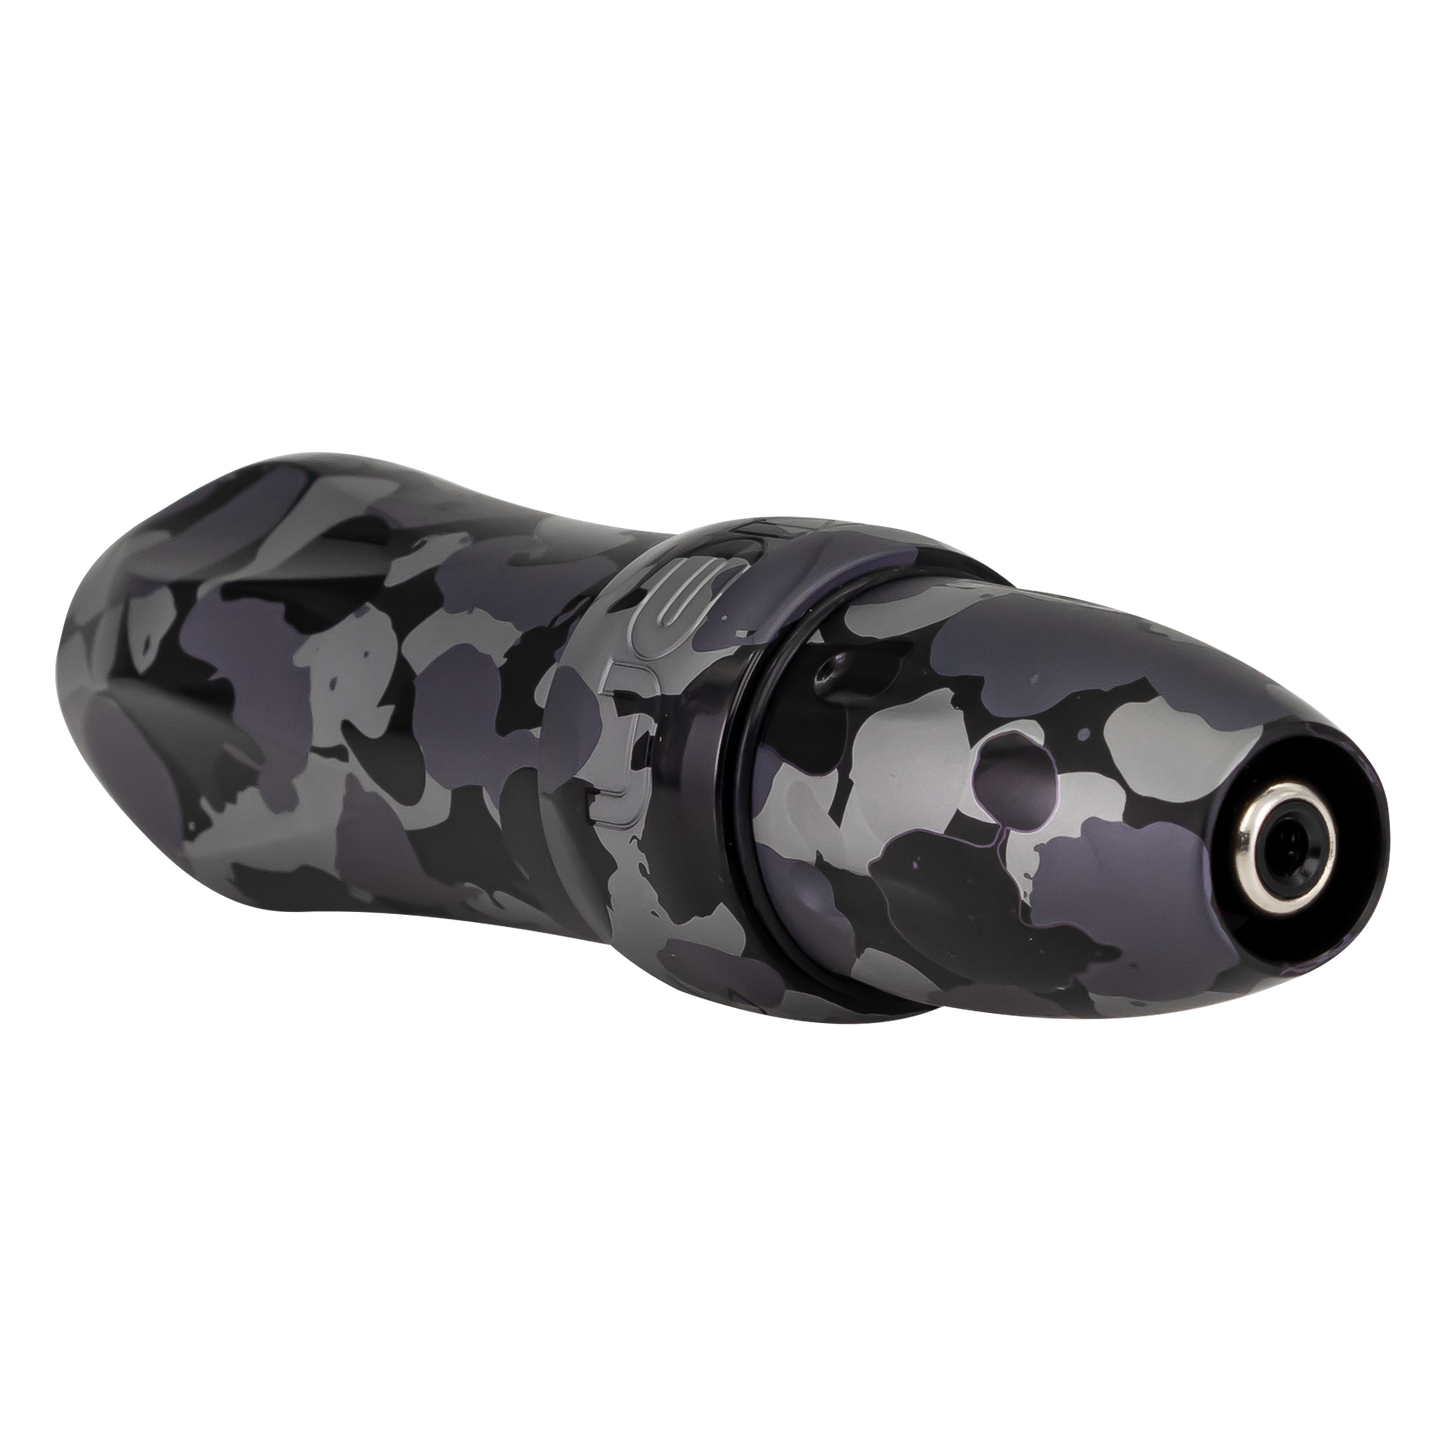 Spektra Xion in spotted black and gray camouflage, view from the plug